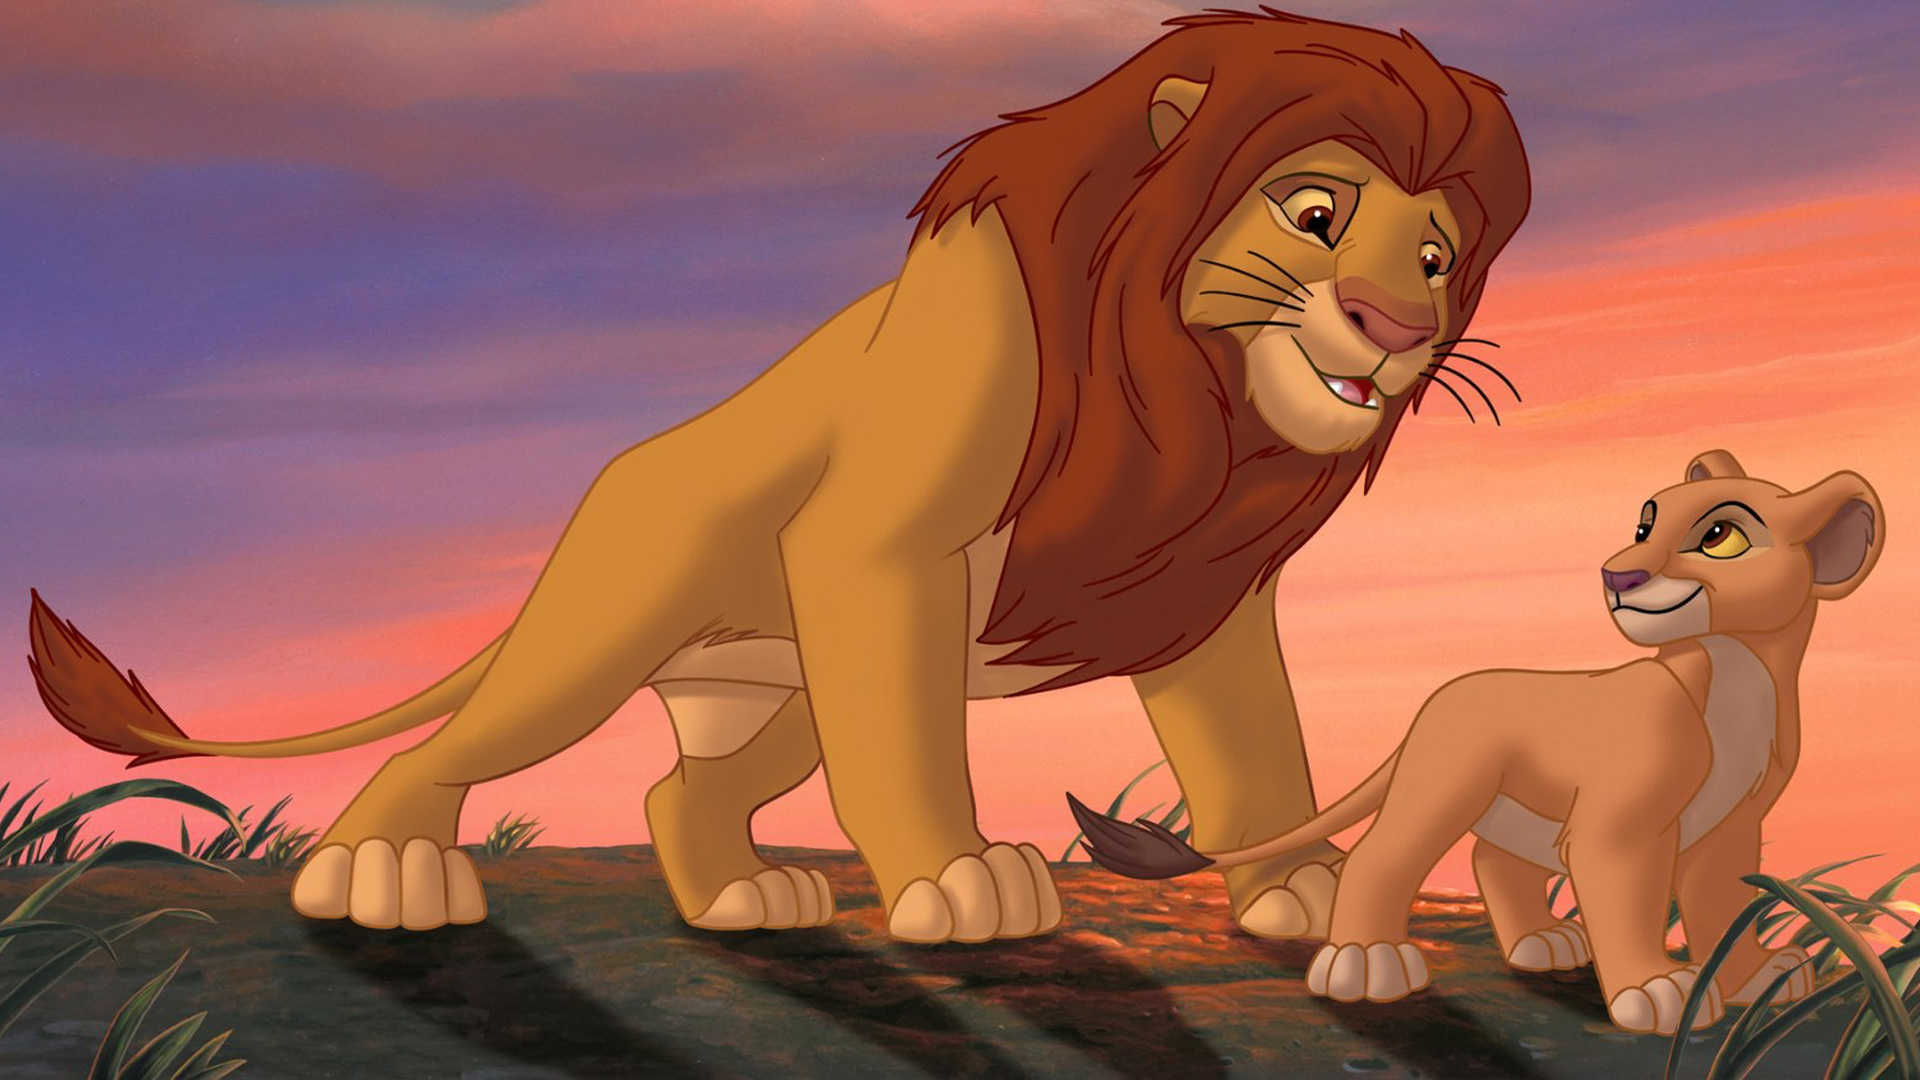 The Lion King Available On Amazon Prime Top Sellers, UP TO 60% OFF